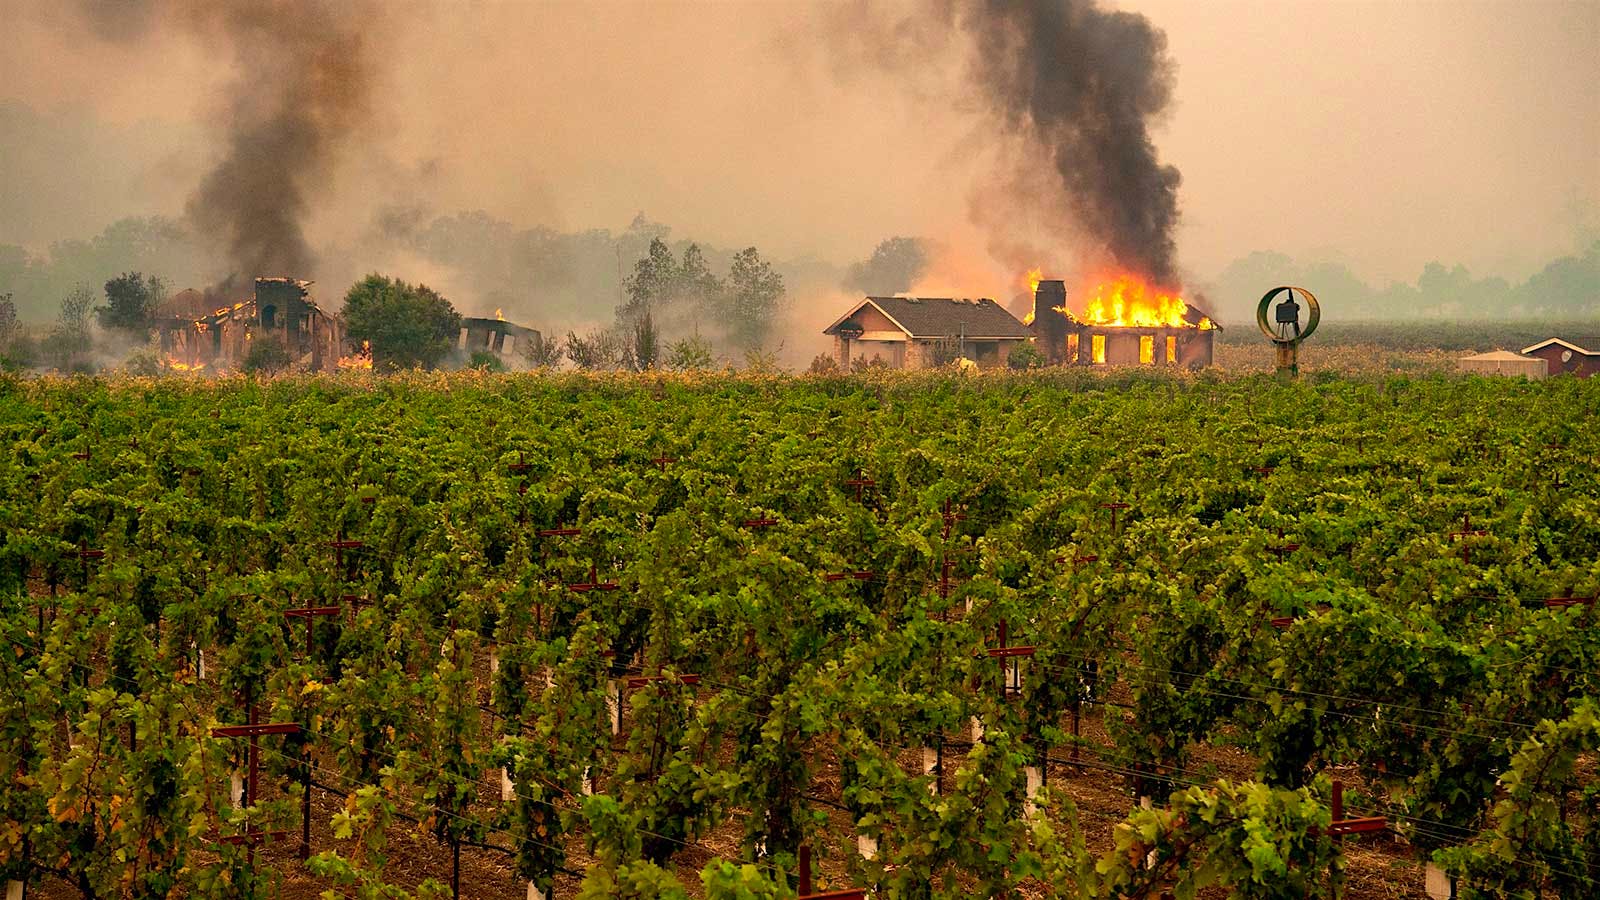 Wineries Shuttered, Vintners Worried by Sonoma Wildfire